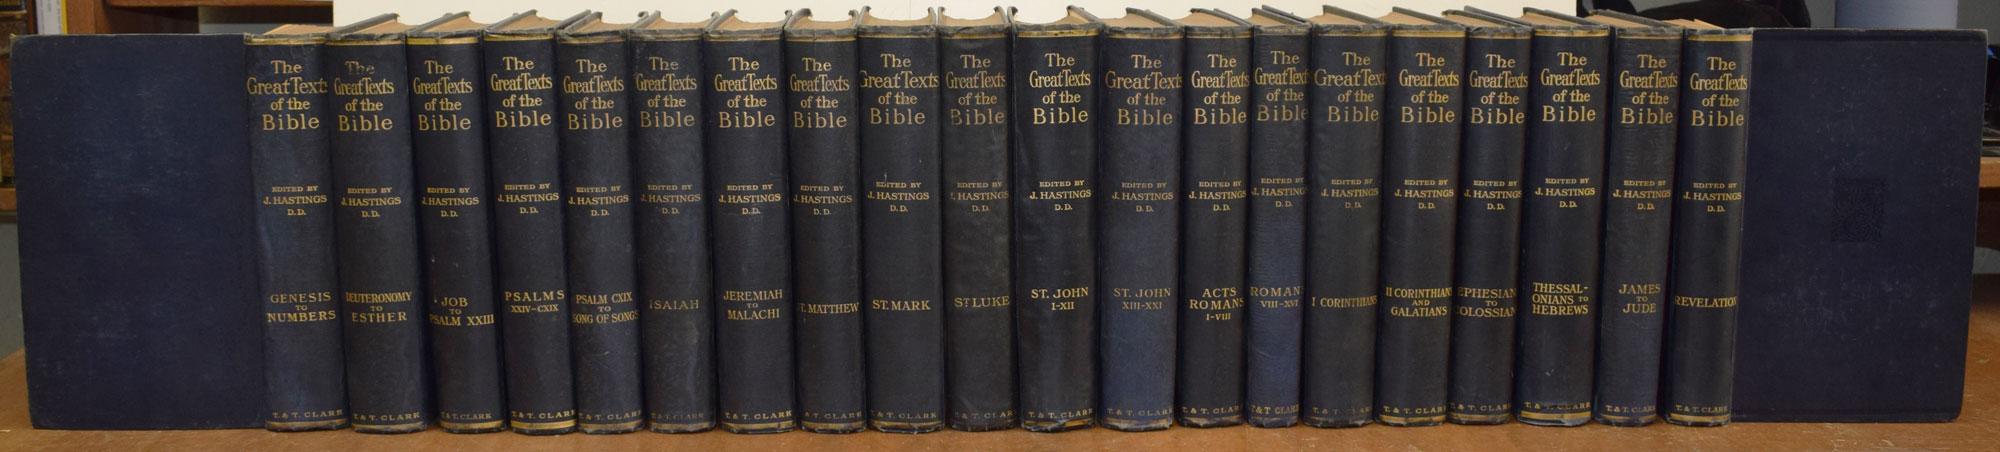 The Great Texts of the Bible. 20 volume set.